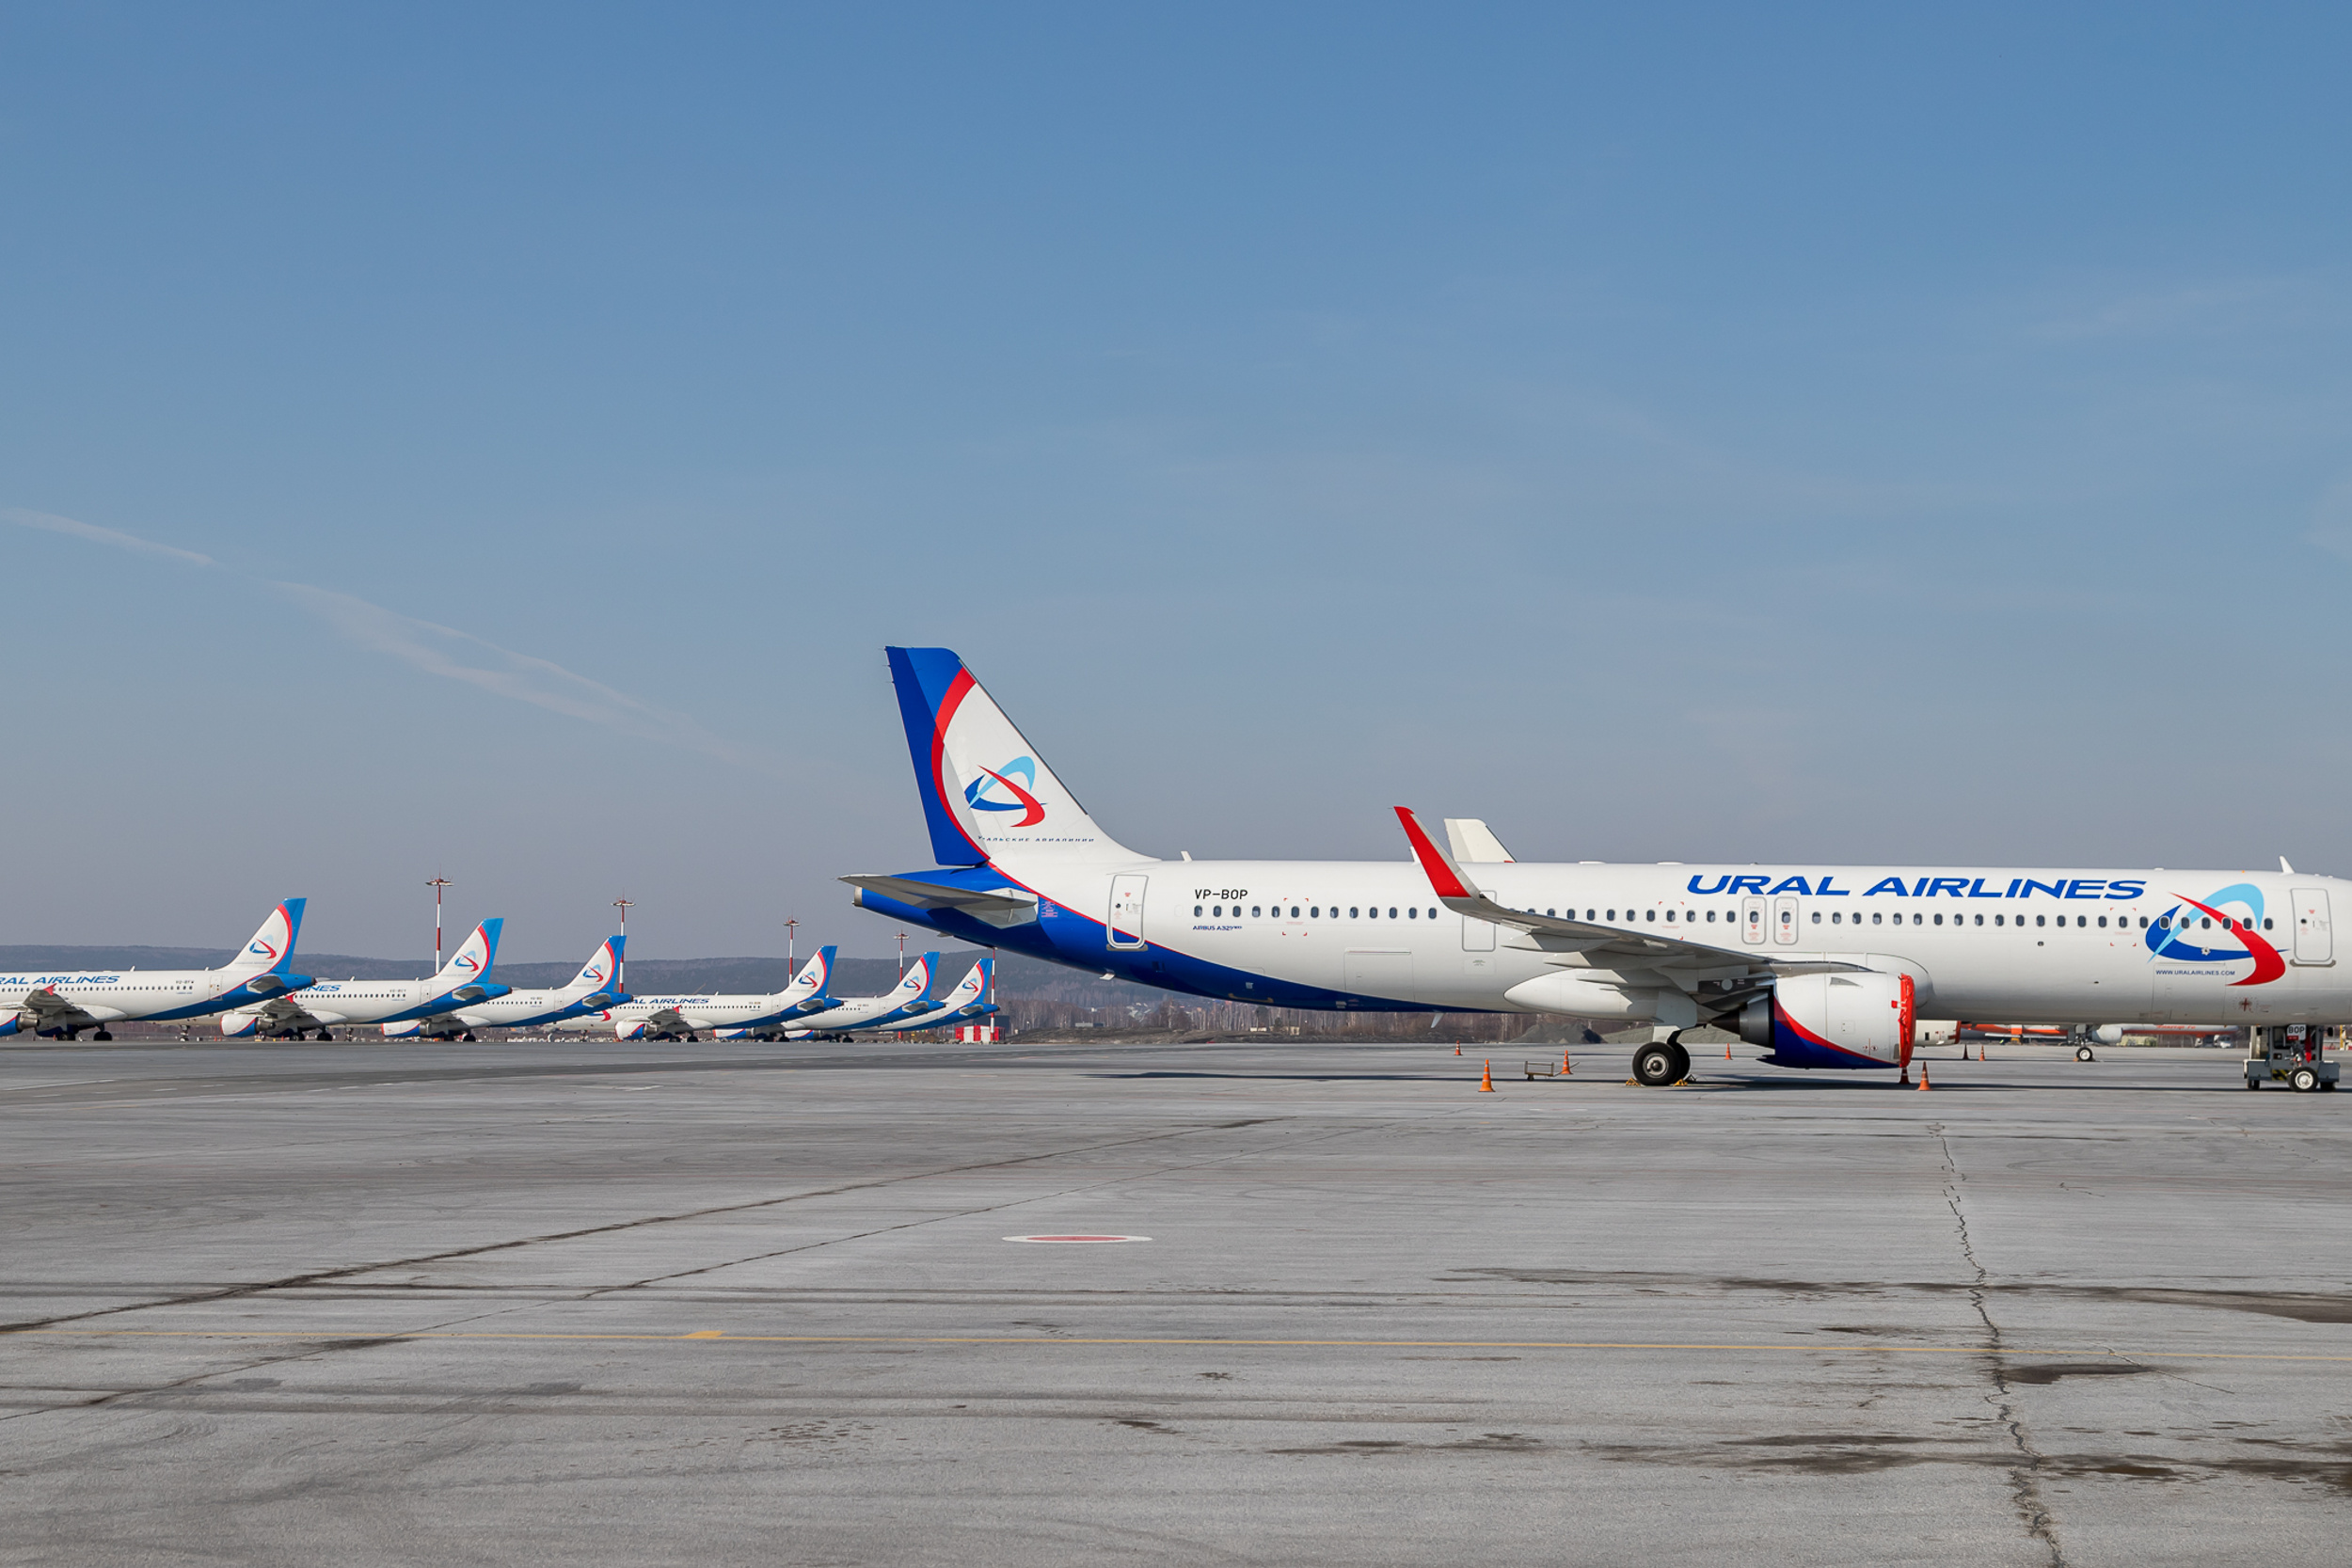 A321 Neo Ural Airlines